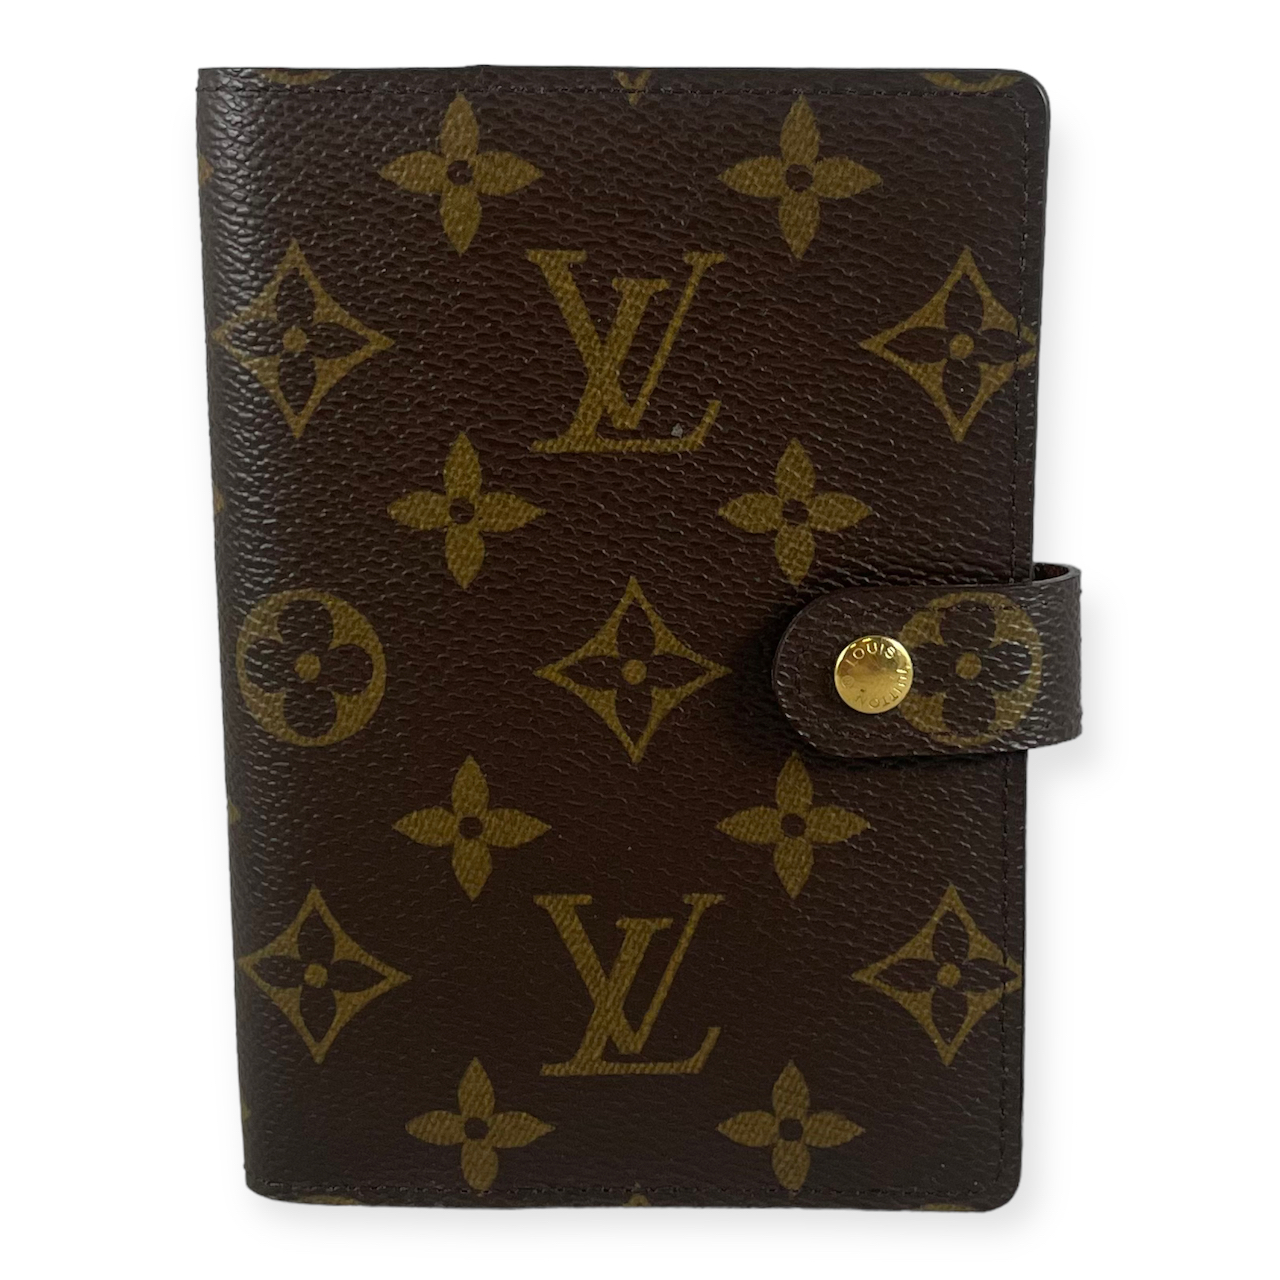 Vintage Louis Vuitton Small Ring Agenda – Pickled Vintage